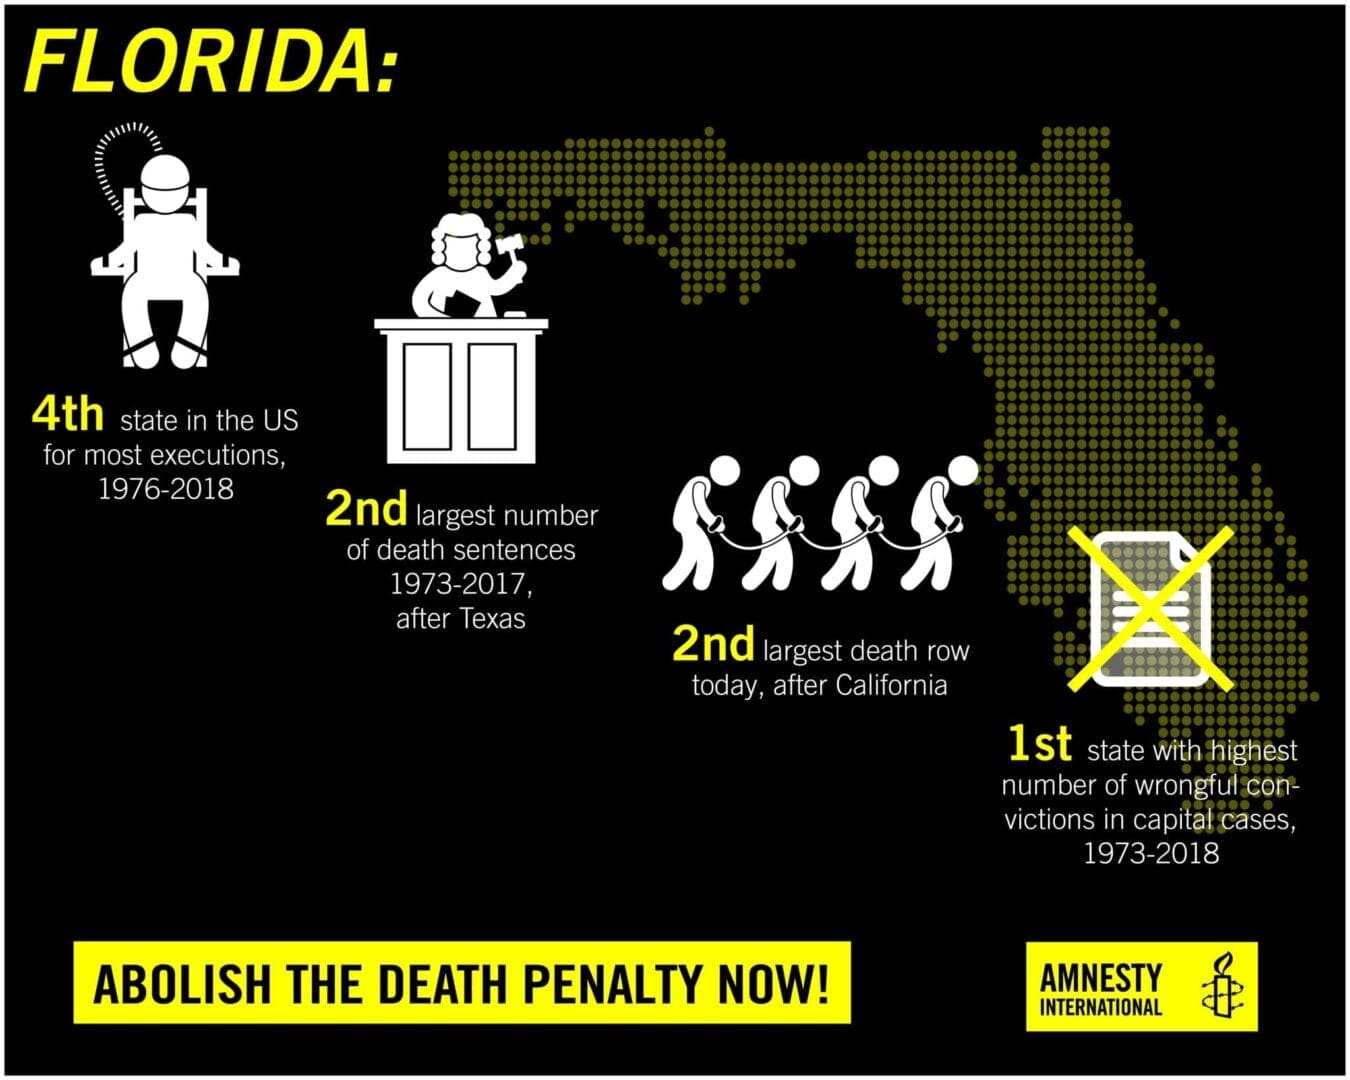 The Death Penalty in Florida Amnesty International USA